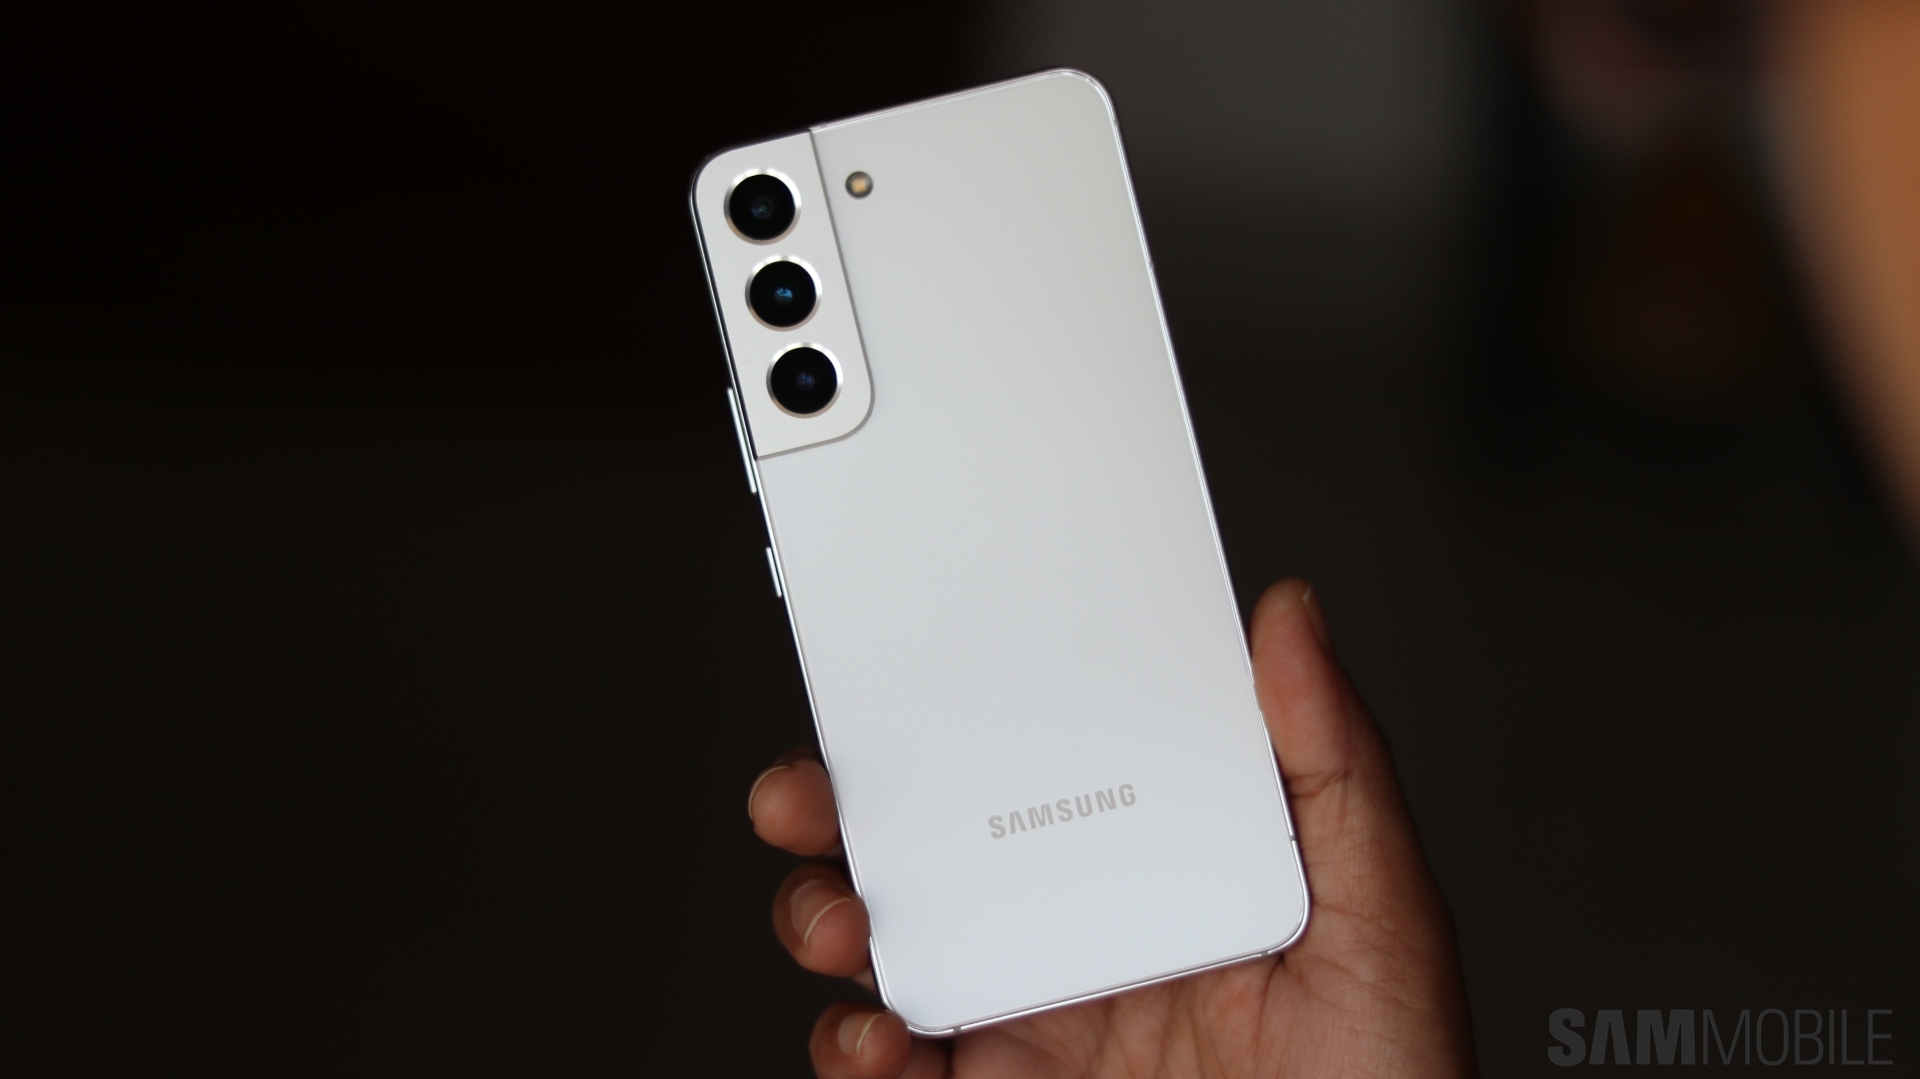 Samsung Galaxy S22 Ultra review: All the phone you need